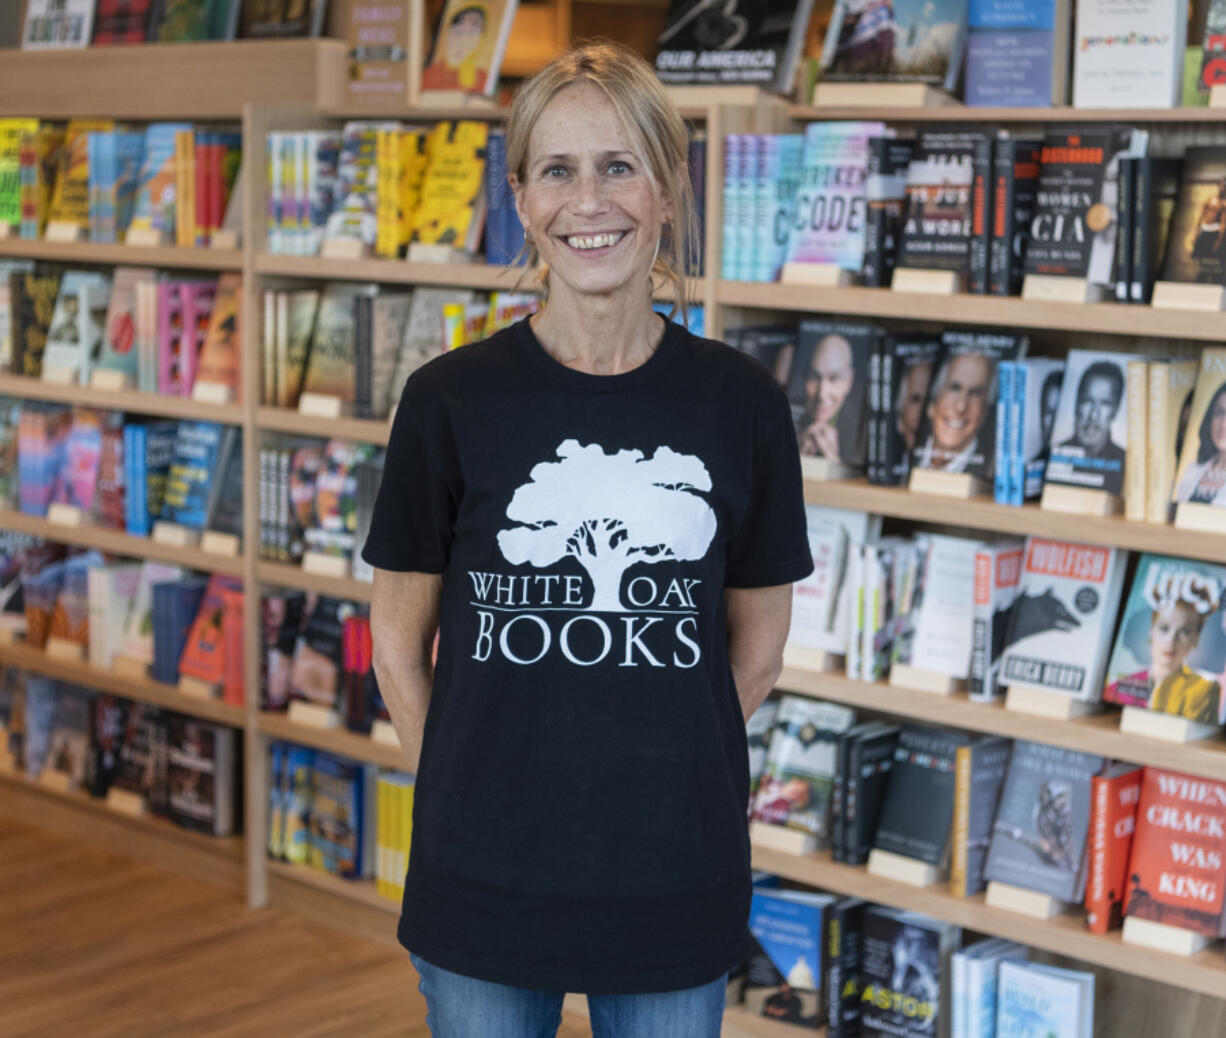 Owner Sara Smith-Glavin is fulfilling a lifelong dream of opening a bookshop with White Oak Books, located in Vancouver&rsquo;s Uptown Village.